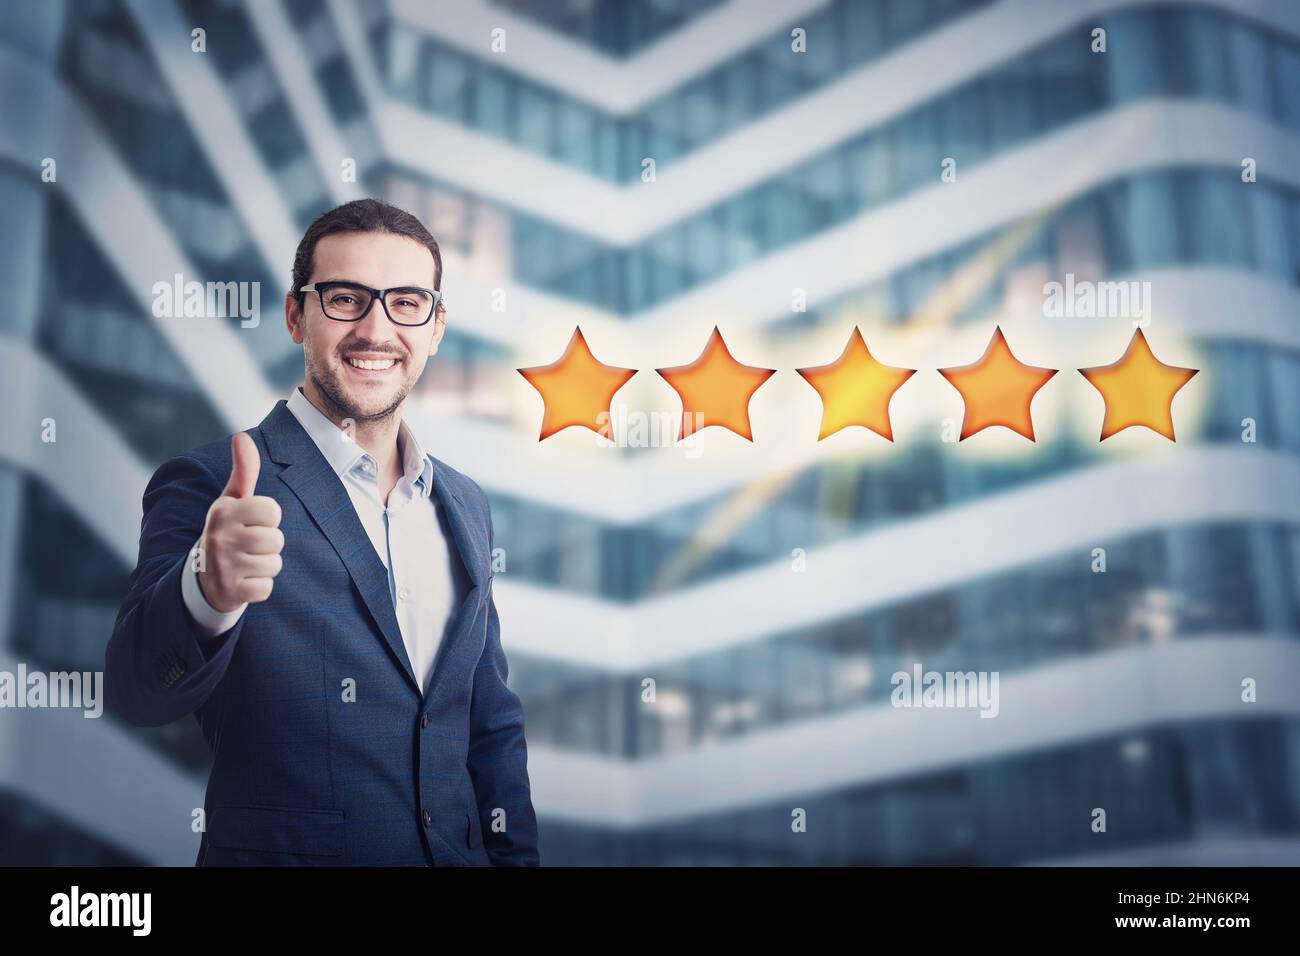 Cheerful businessman shows thumb up gesture, approvement sign, giving 5 stars rating feedback. Business person evaluating an experience, excellent cus Stock Photo